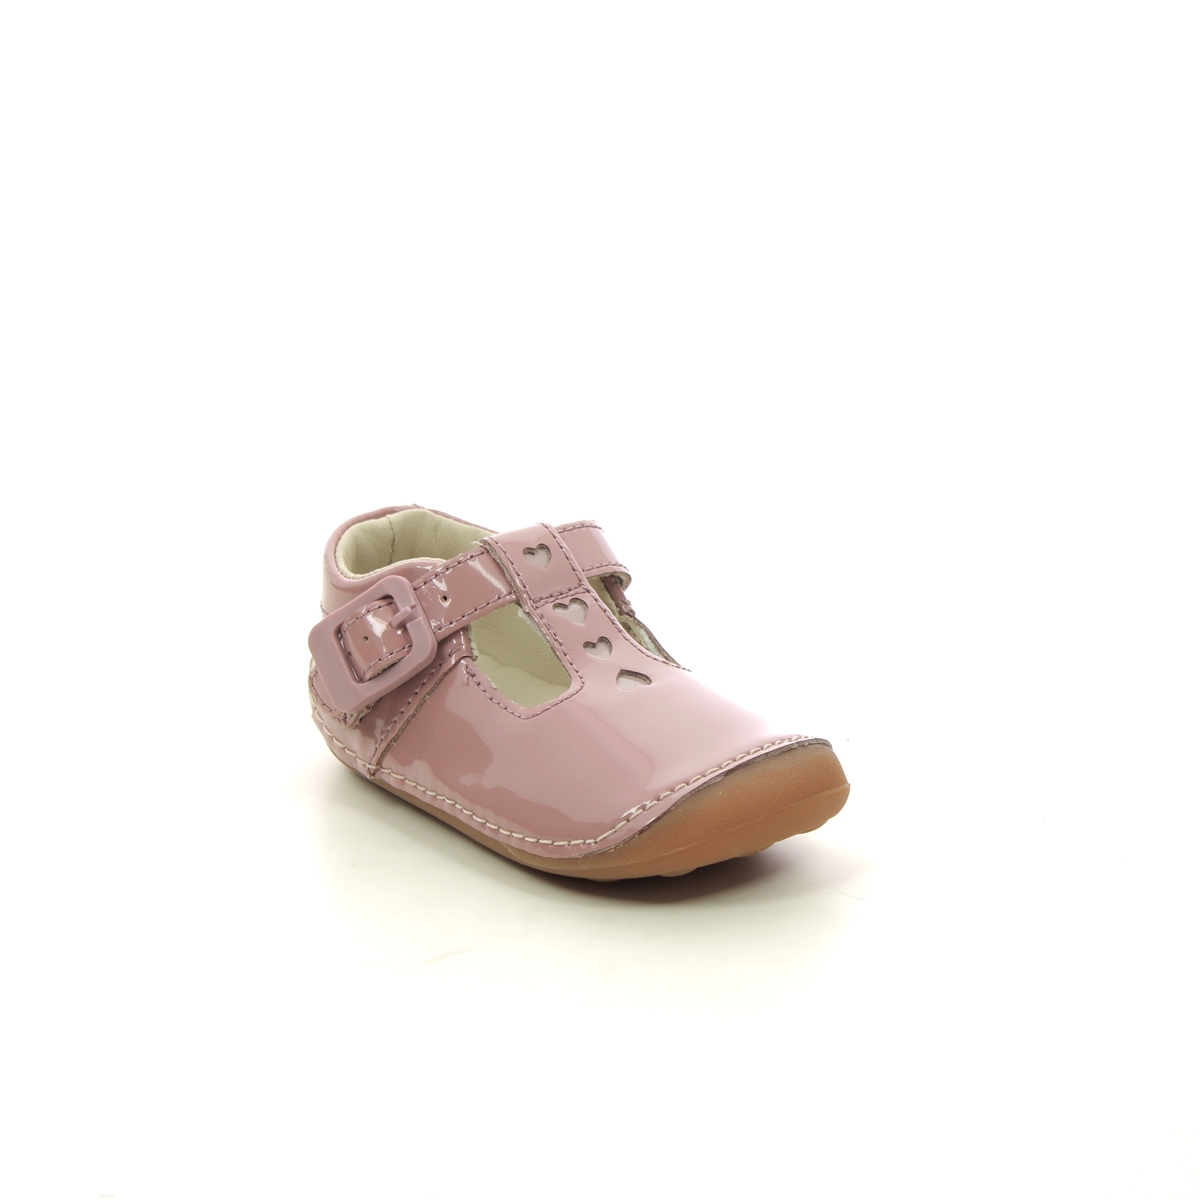 Clarks Tiny Beat T Pink Kids Girls First And Baby Shoes 694086F In Size 5 In Plain Pink F Width Fitting Regular Fit For kids